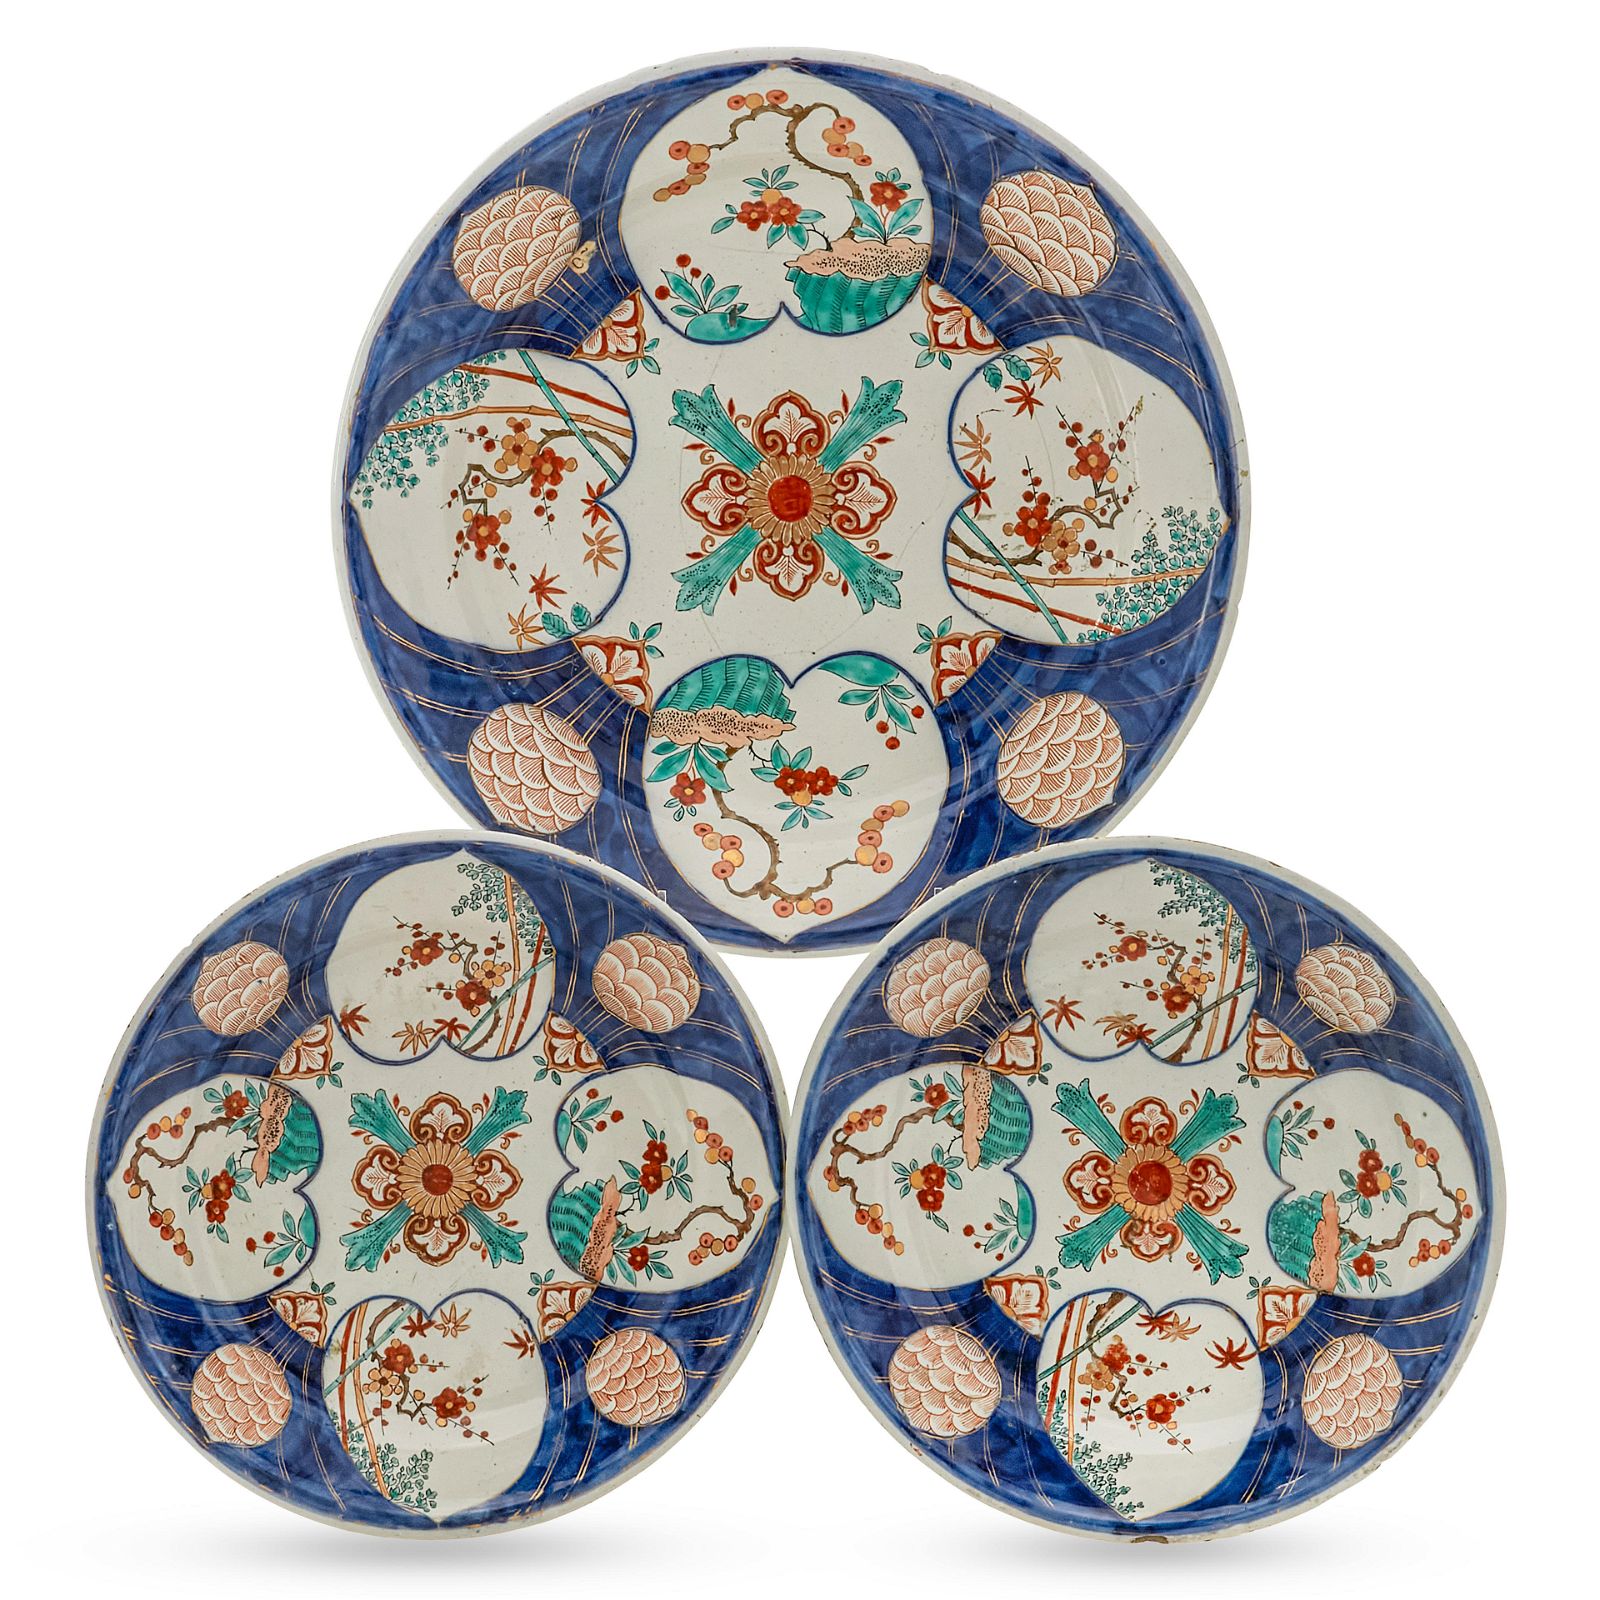 TWO DUTCH DELFT PLATES AND A CHARGERTwo